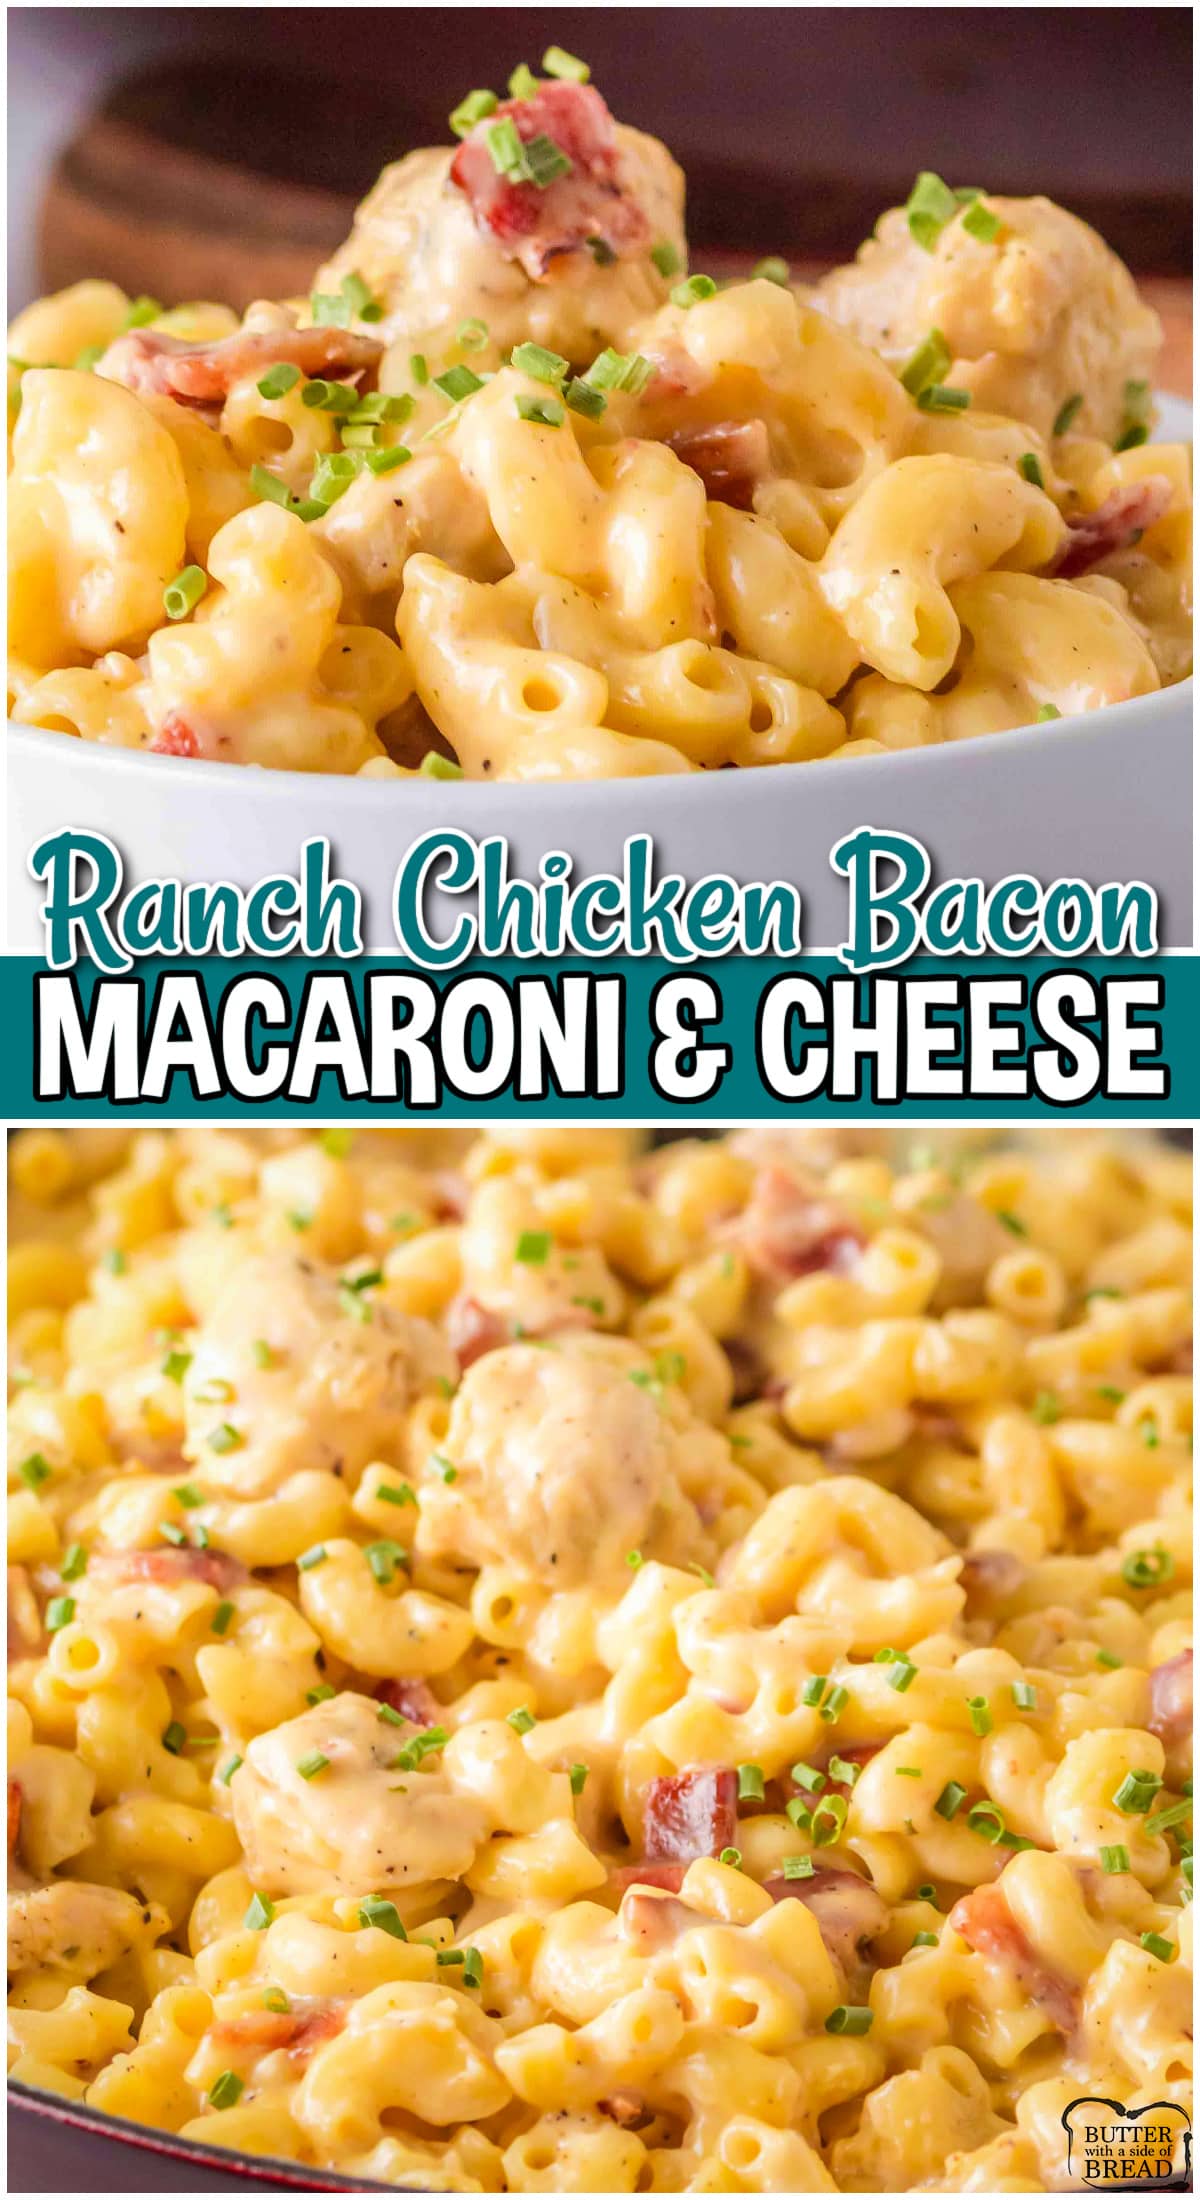 Ranch Chicken Bacon Mac & Cheese is a delicious, hearty pasta dish with fantastic flavors! Cheesy macaroni with added chicken & ranch that everyone loves! 